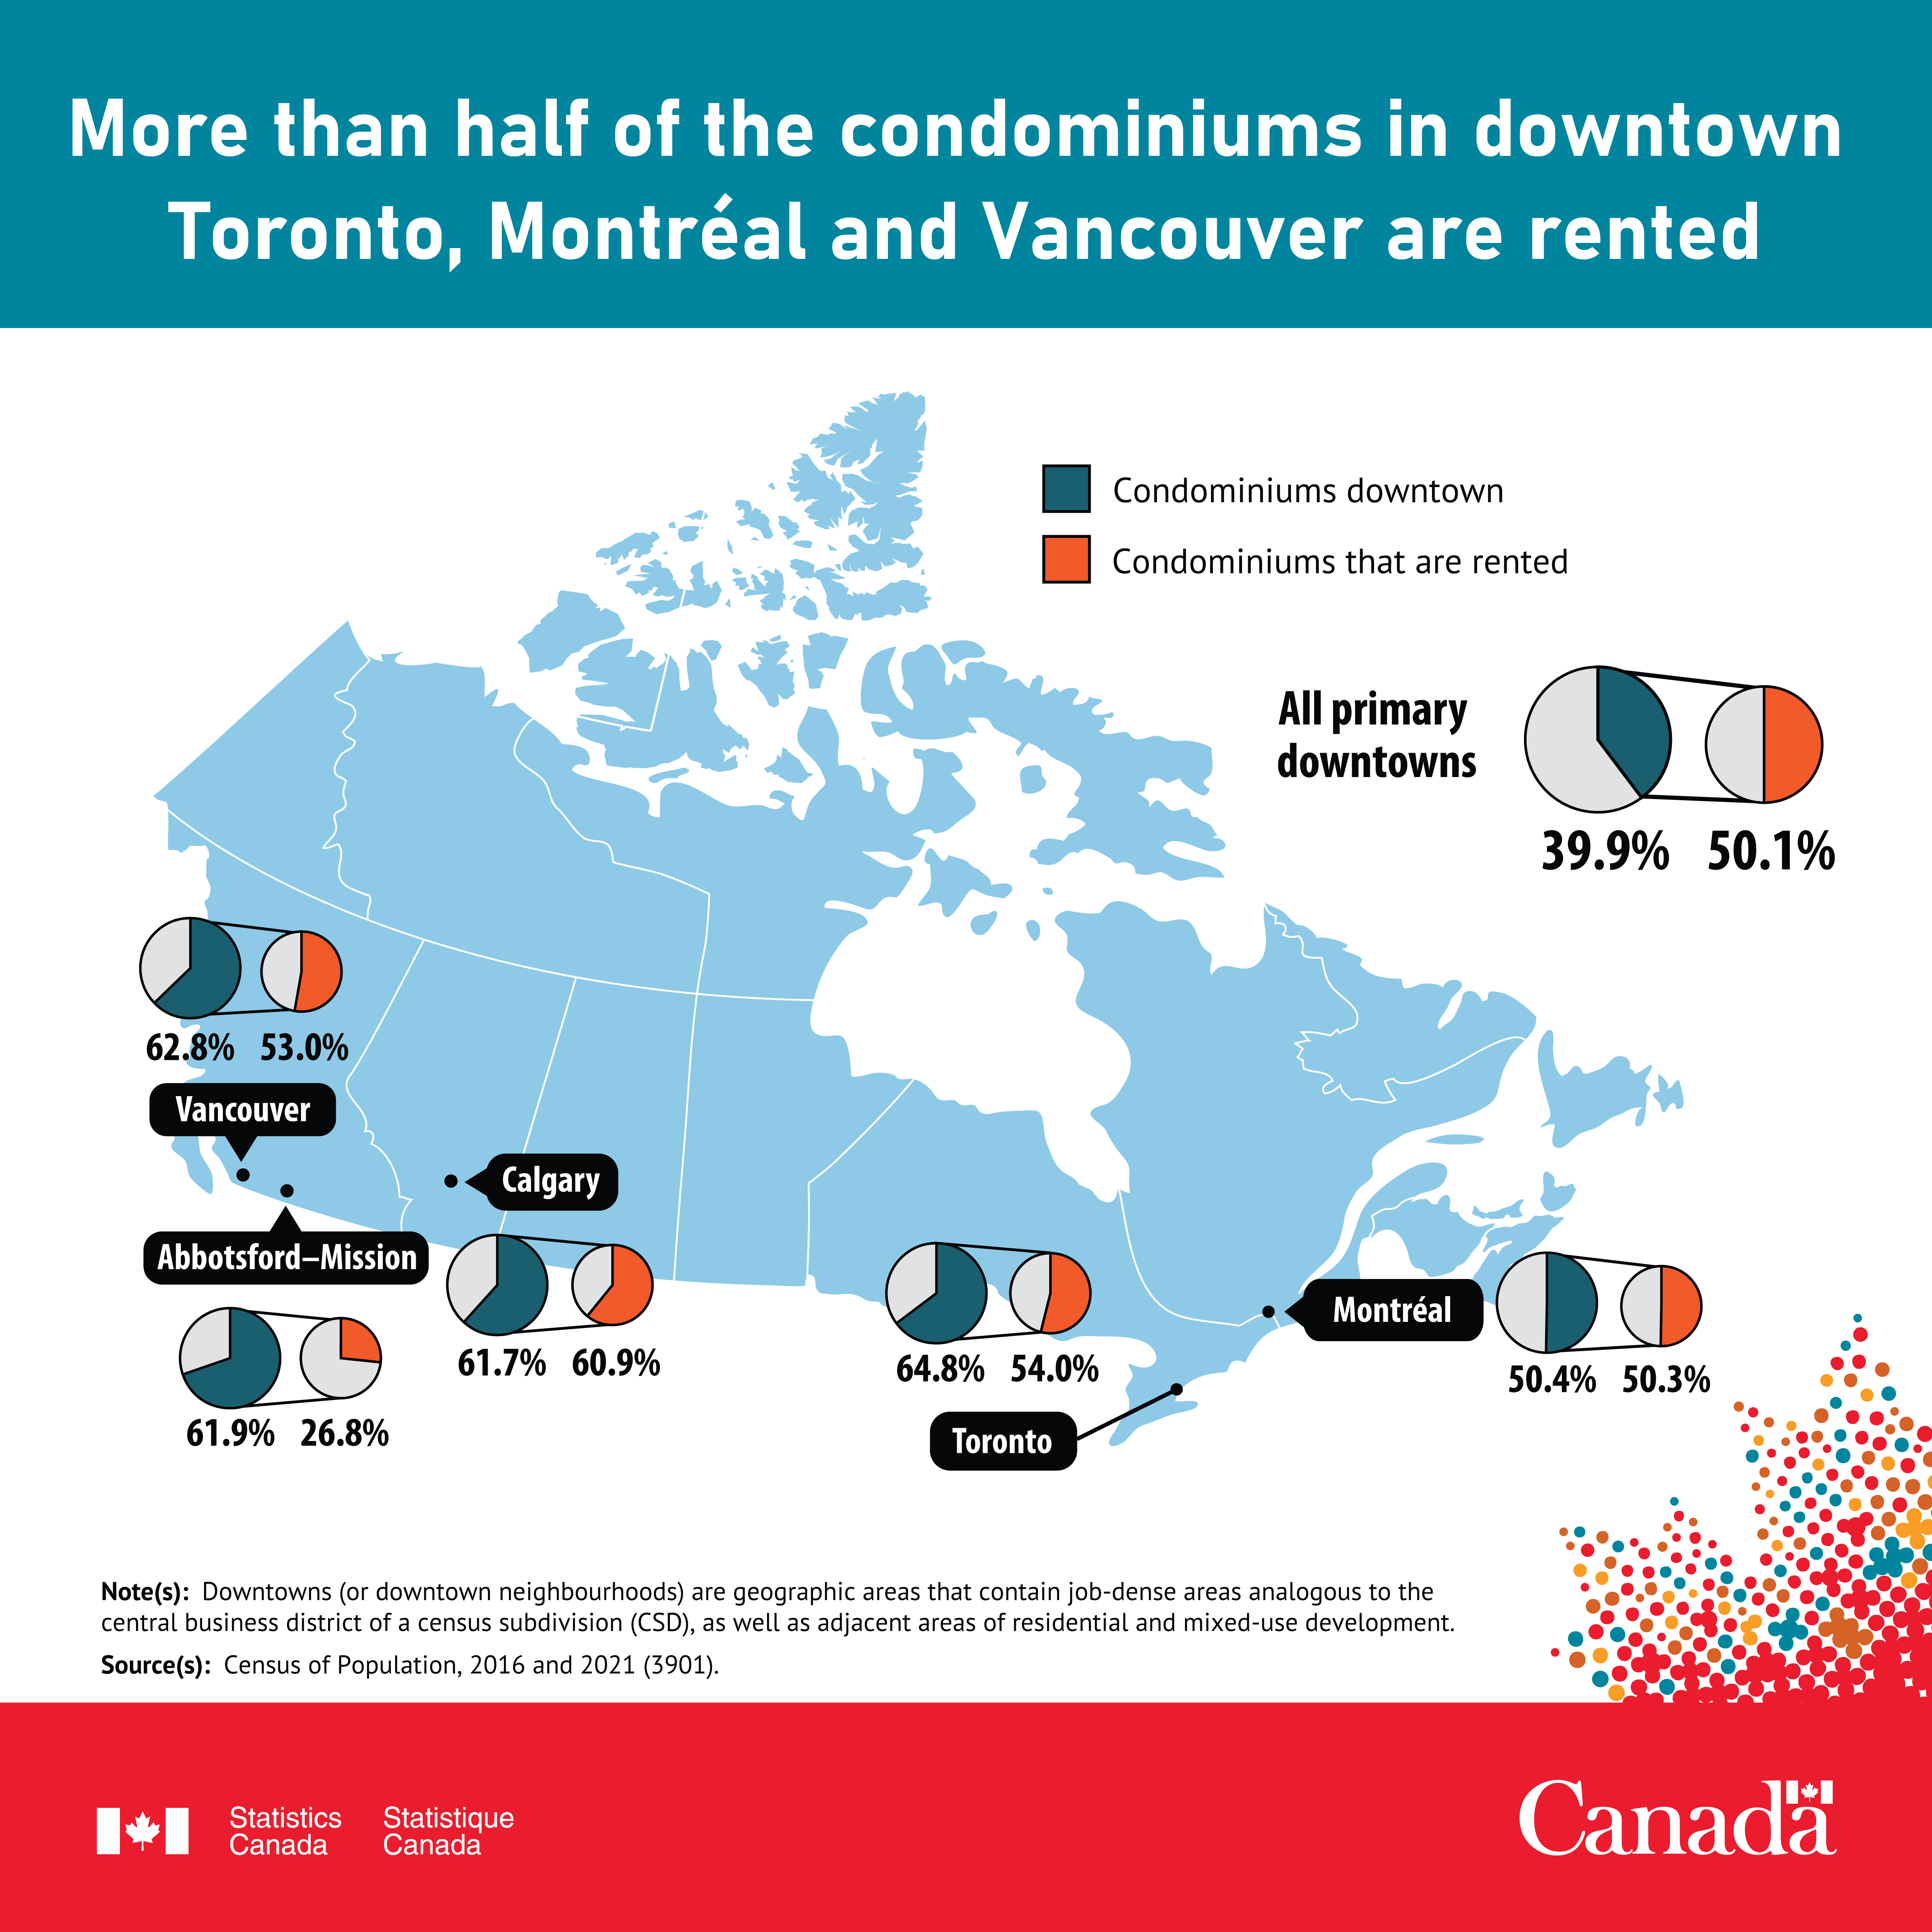 Post 1 image - More than half the condominiums in downtown Toronto, Montréal and Vancouver are rented.